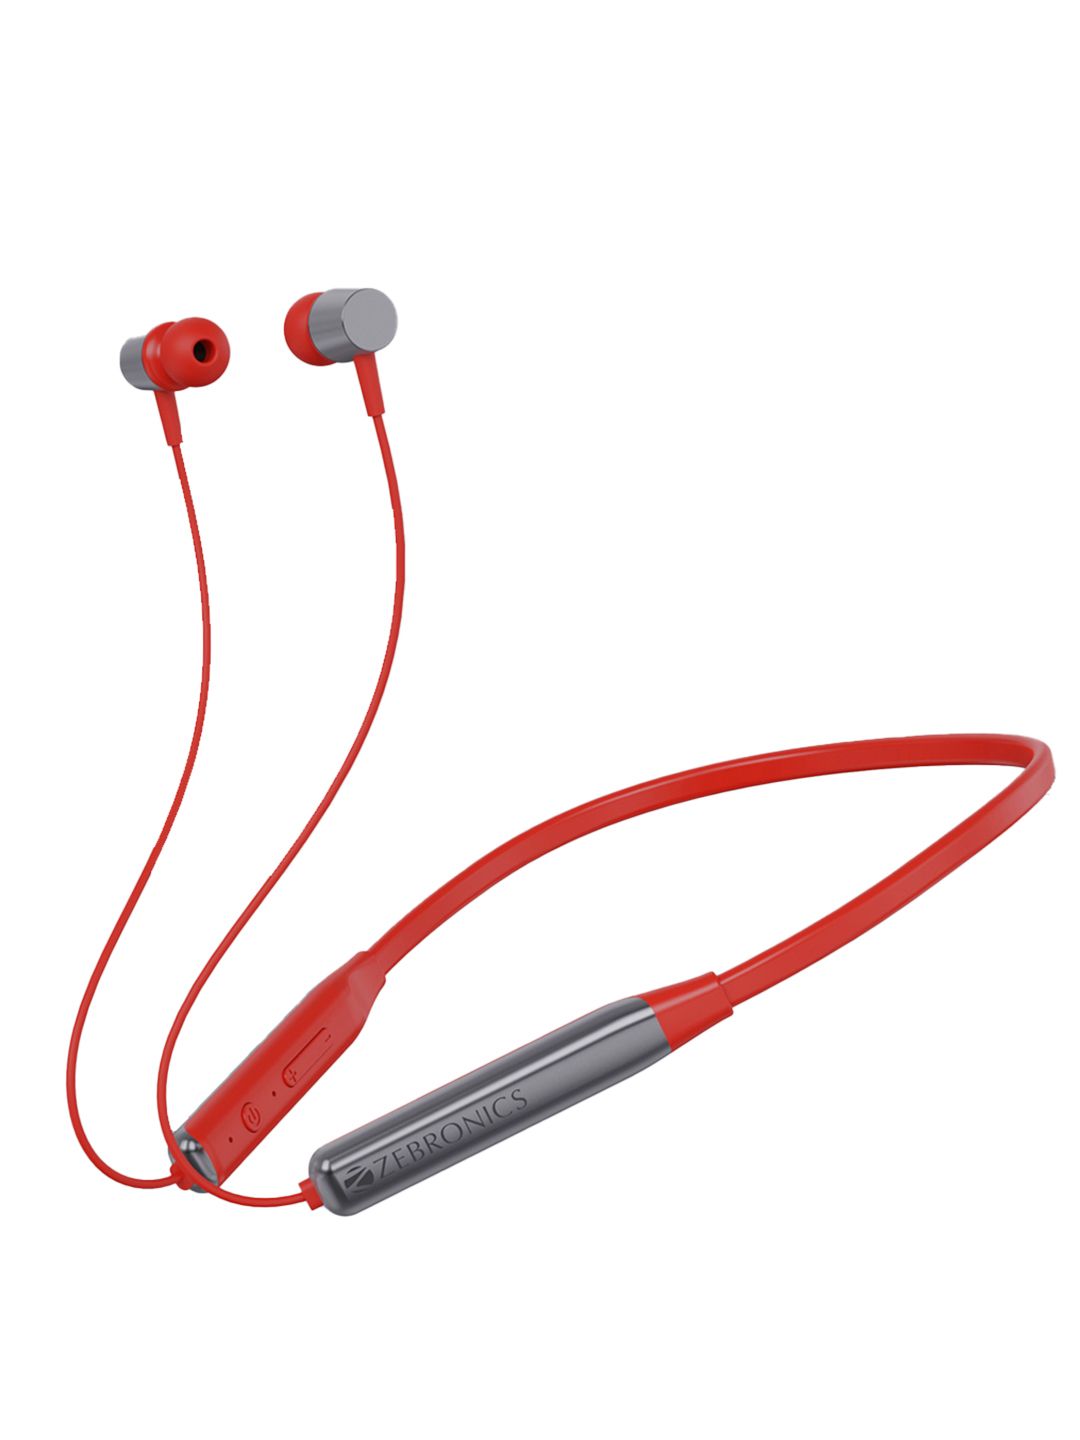 ZEBRONICS Zeb-Evolve Wireless in Ear Neckband Earphone with Supporting BTv5.0 - Red Price in India